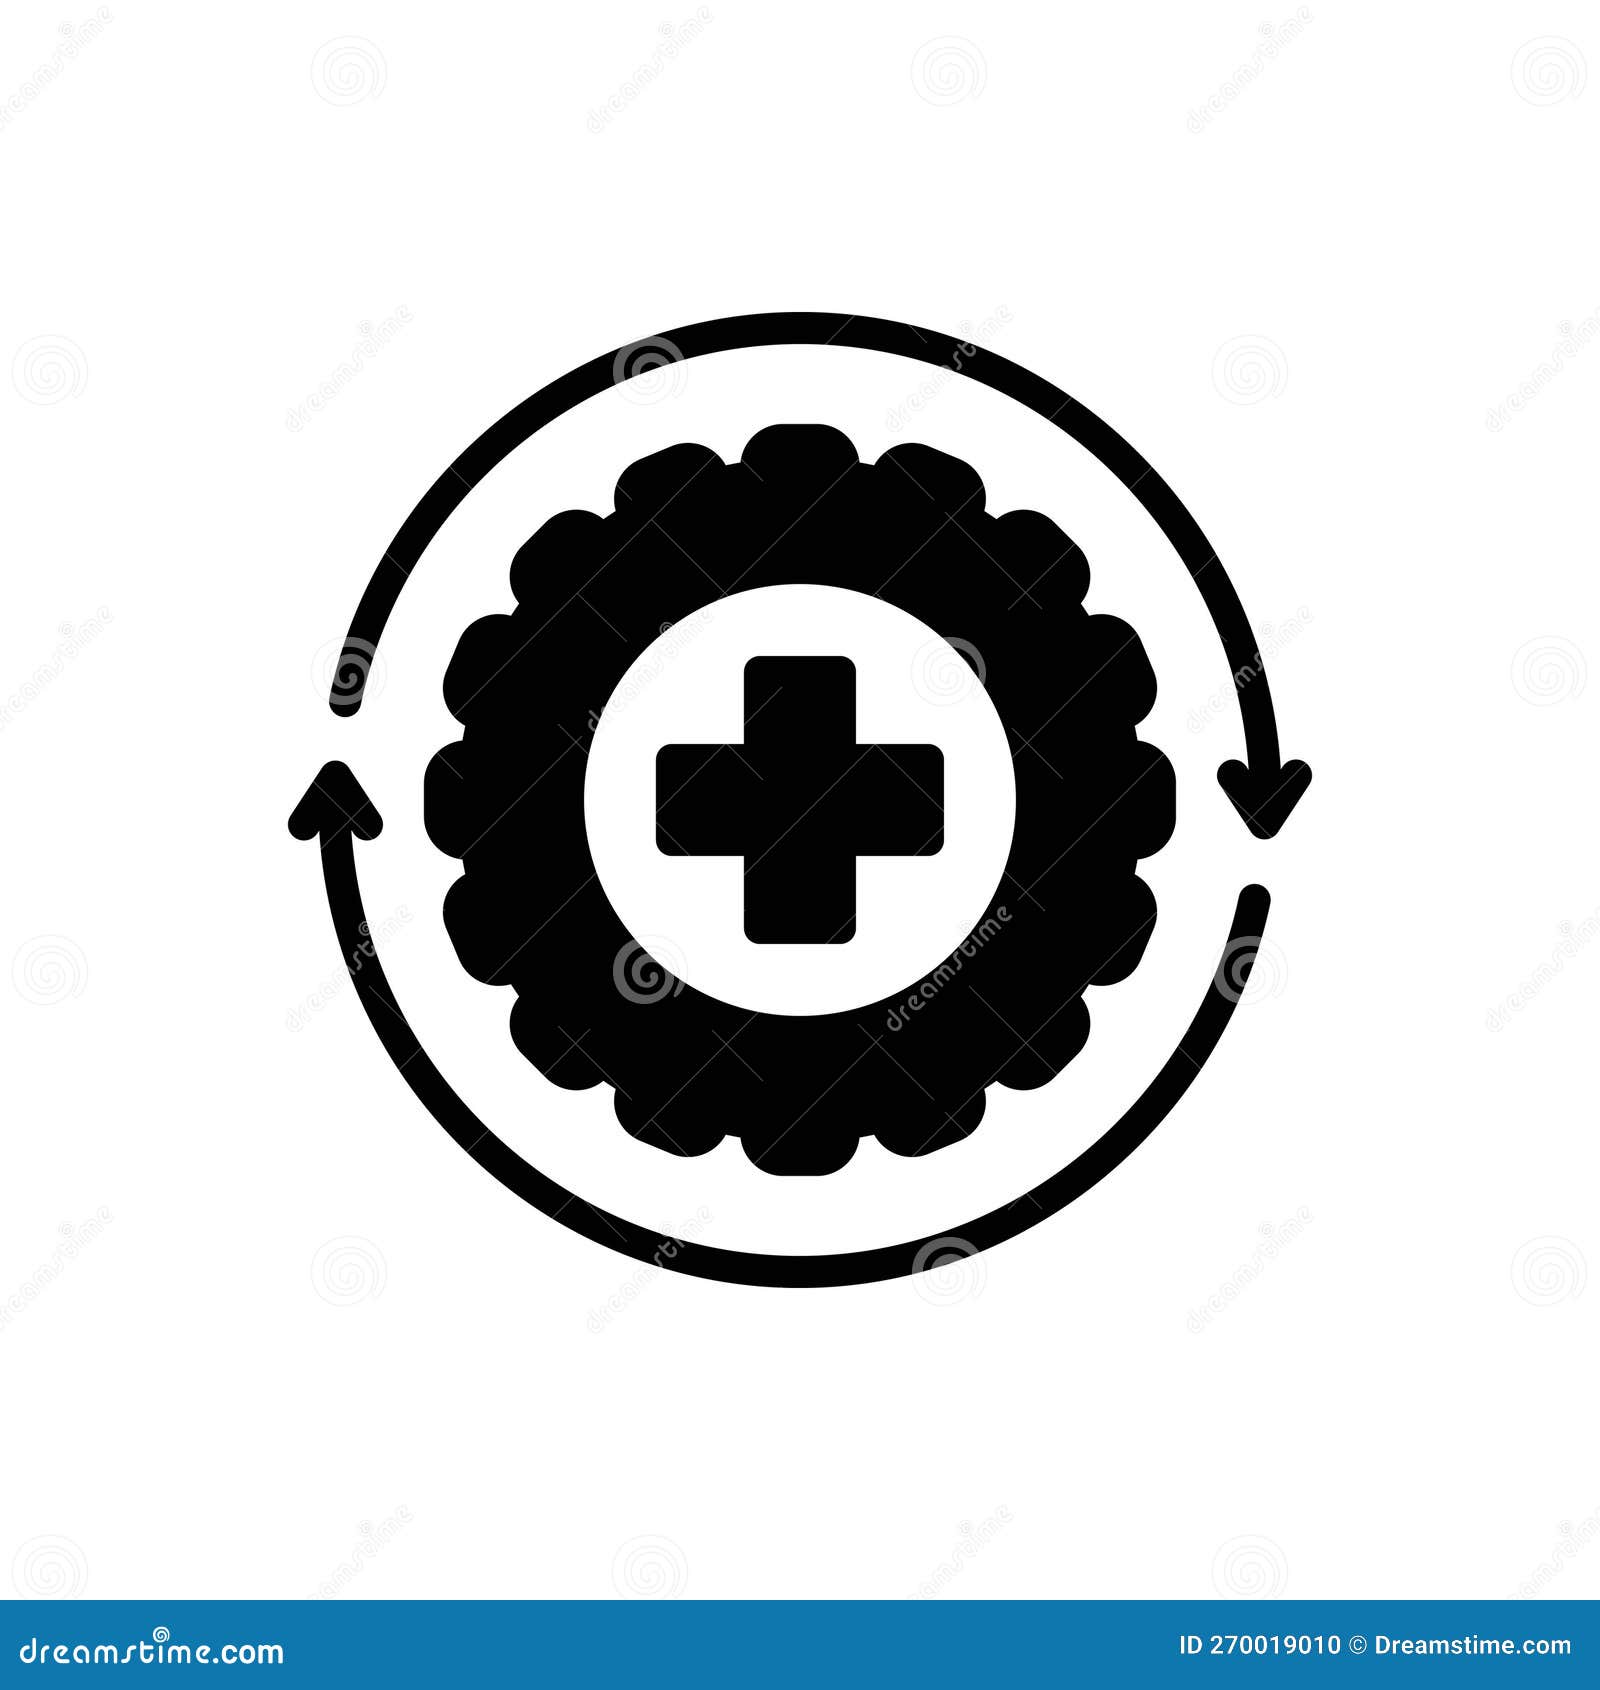 black solid icon for recover, overturn and twist